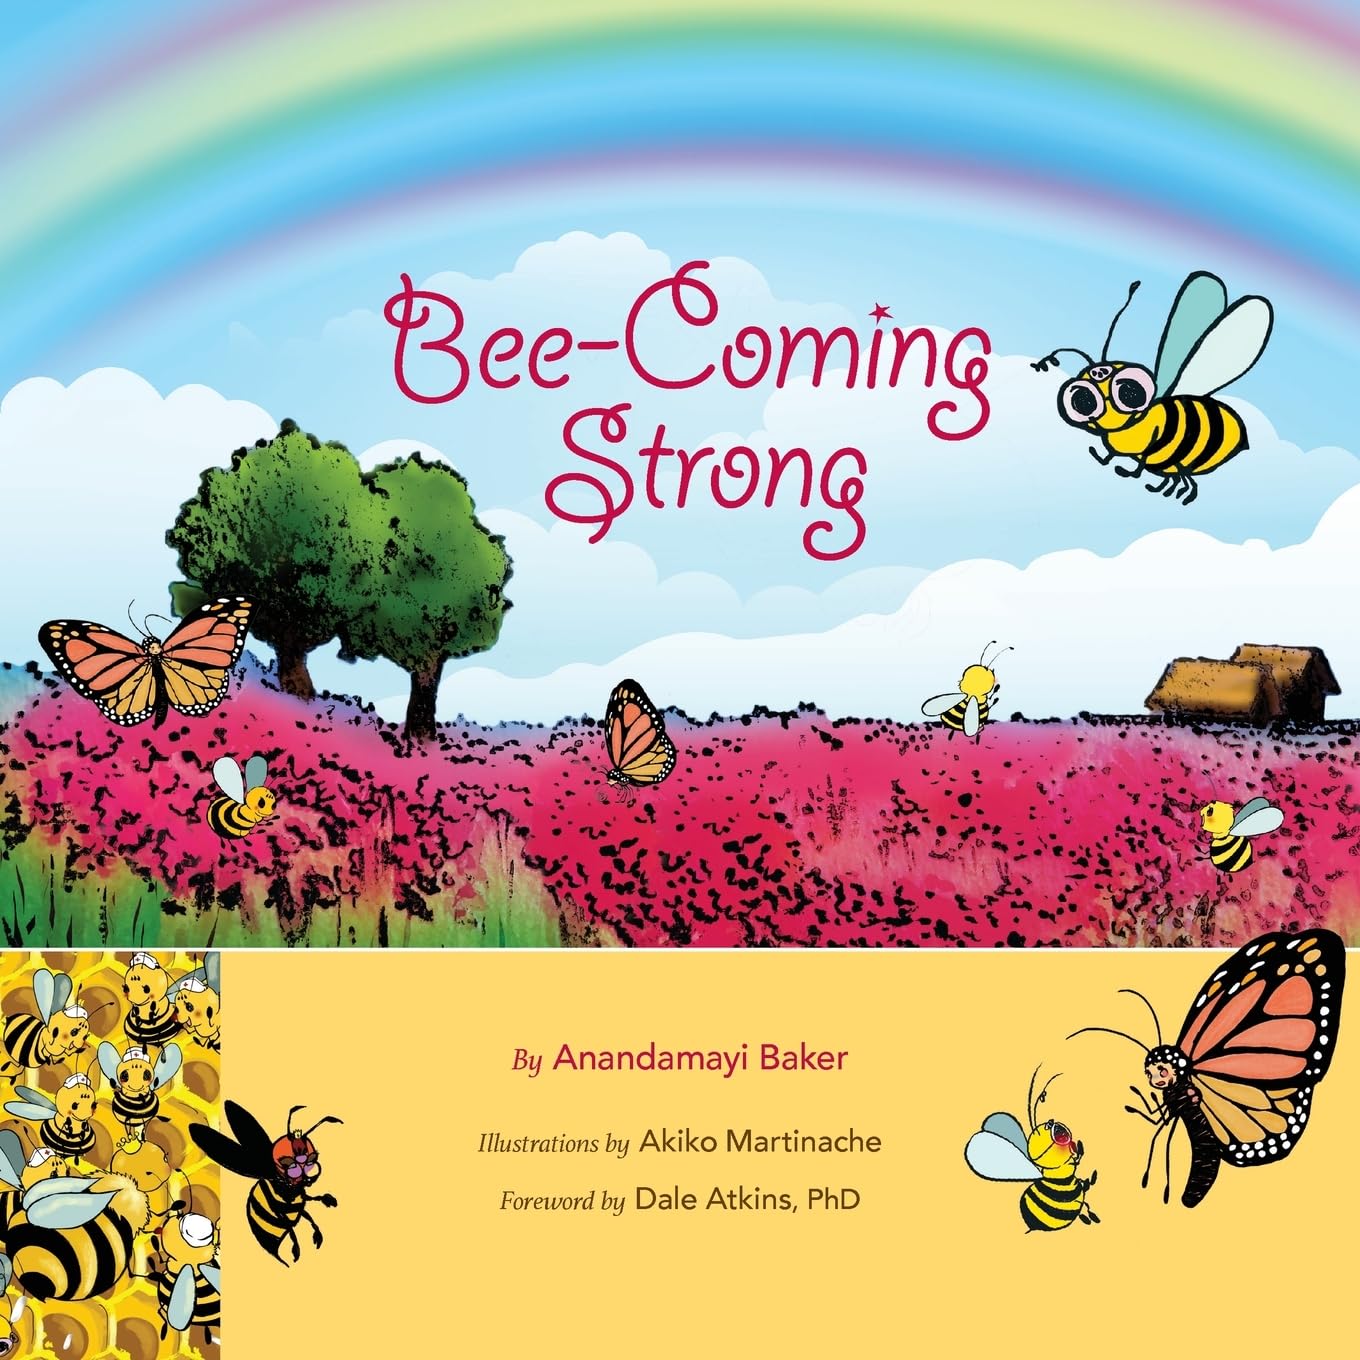 "Bee-Coming Strong" by Anandamayi Baker